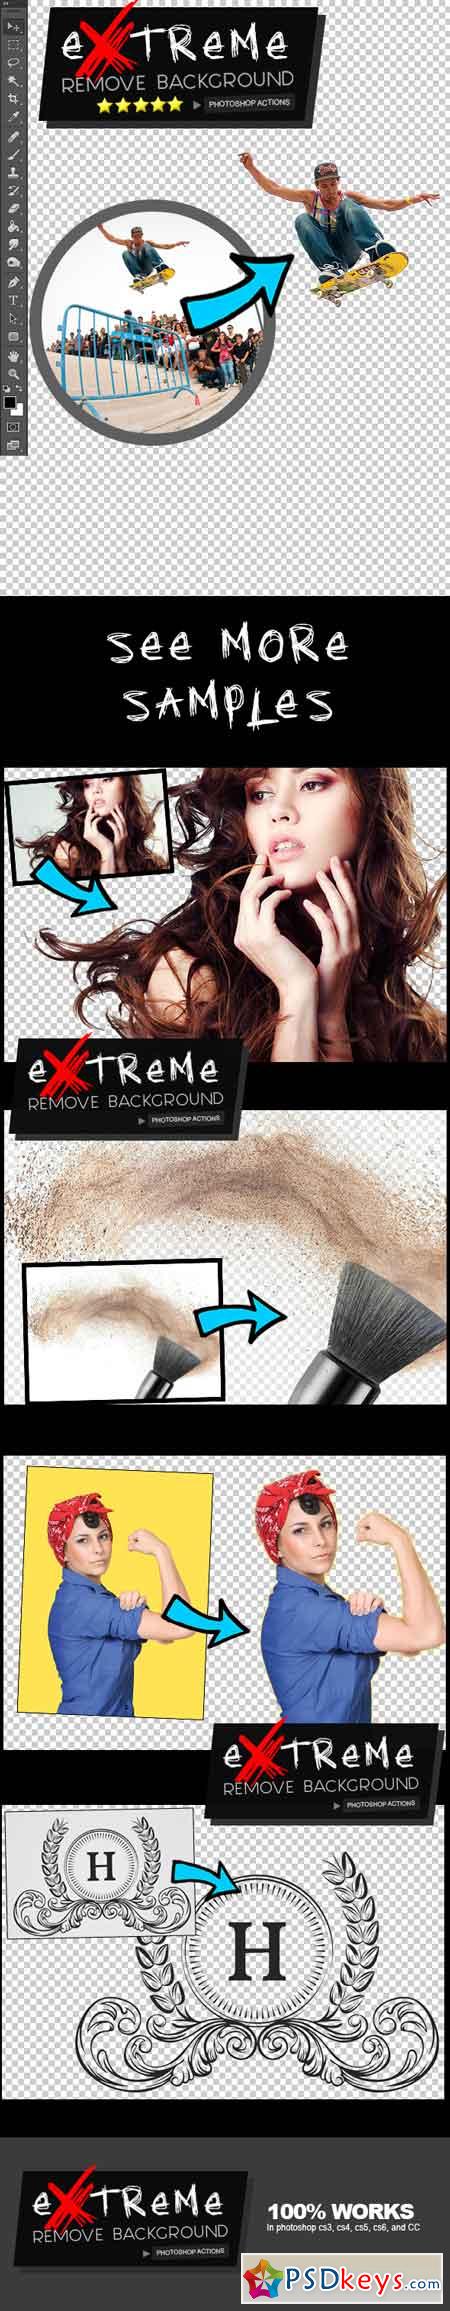 extreme remove background photoshop actions free download